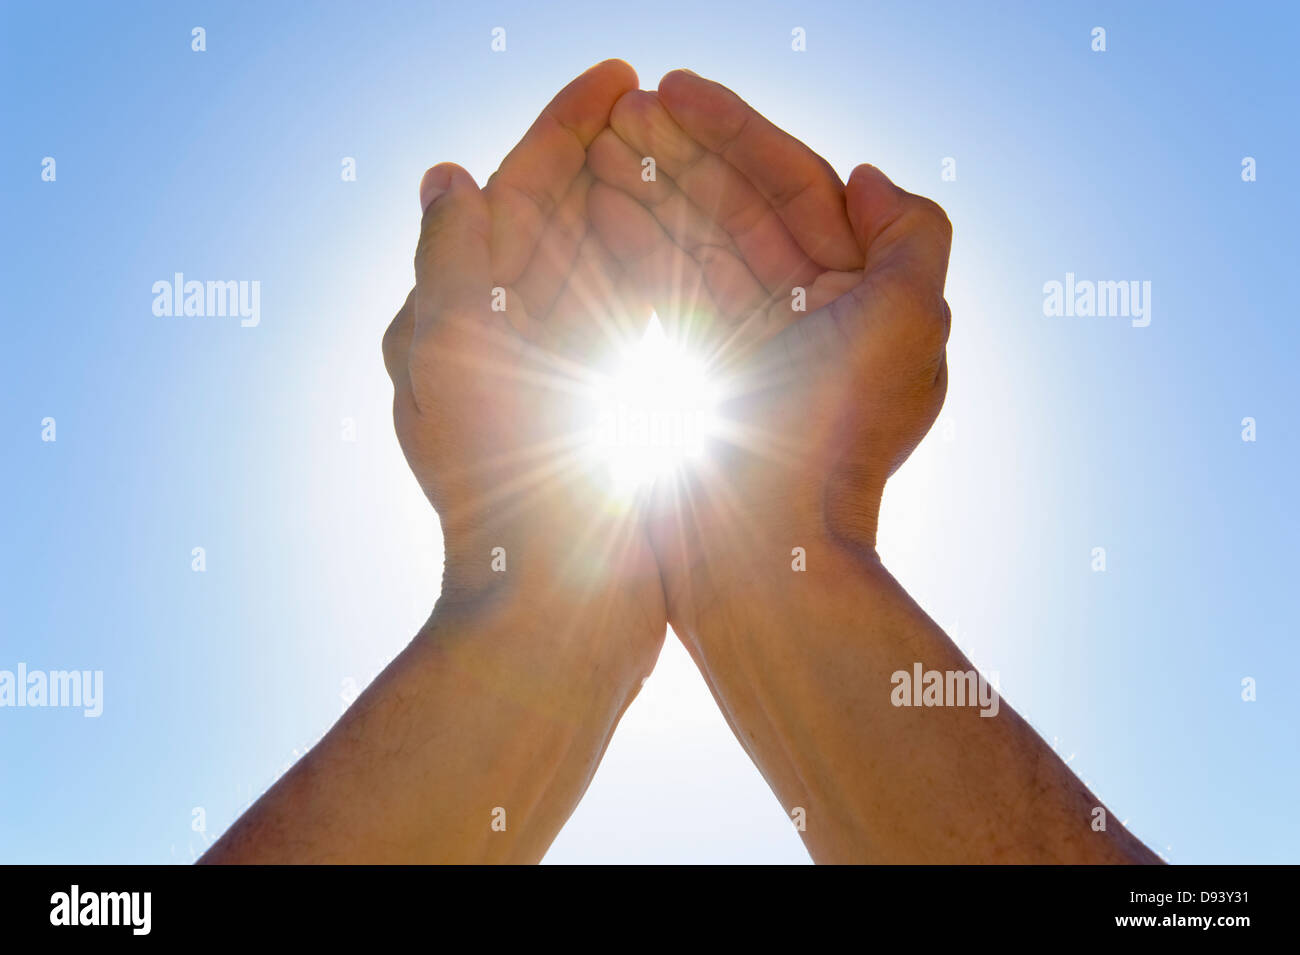 Hand Held Aloft Curved Into U Shape Cupping Copy Space Stock Photo